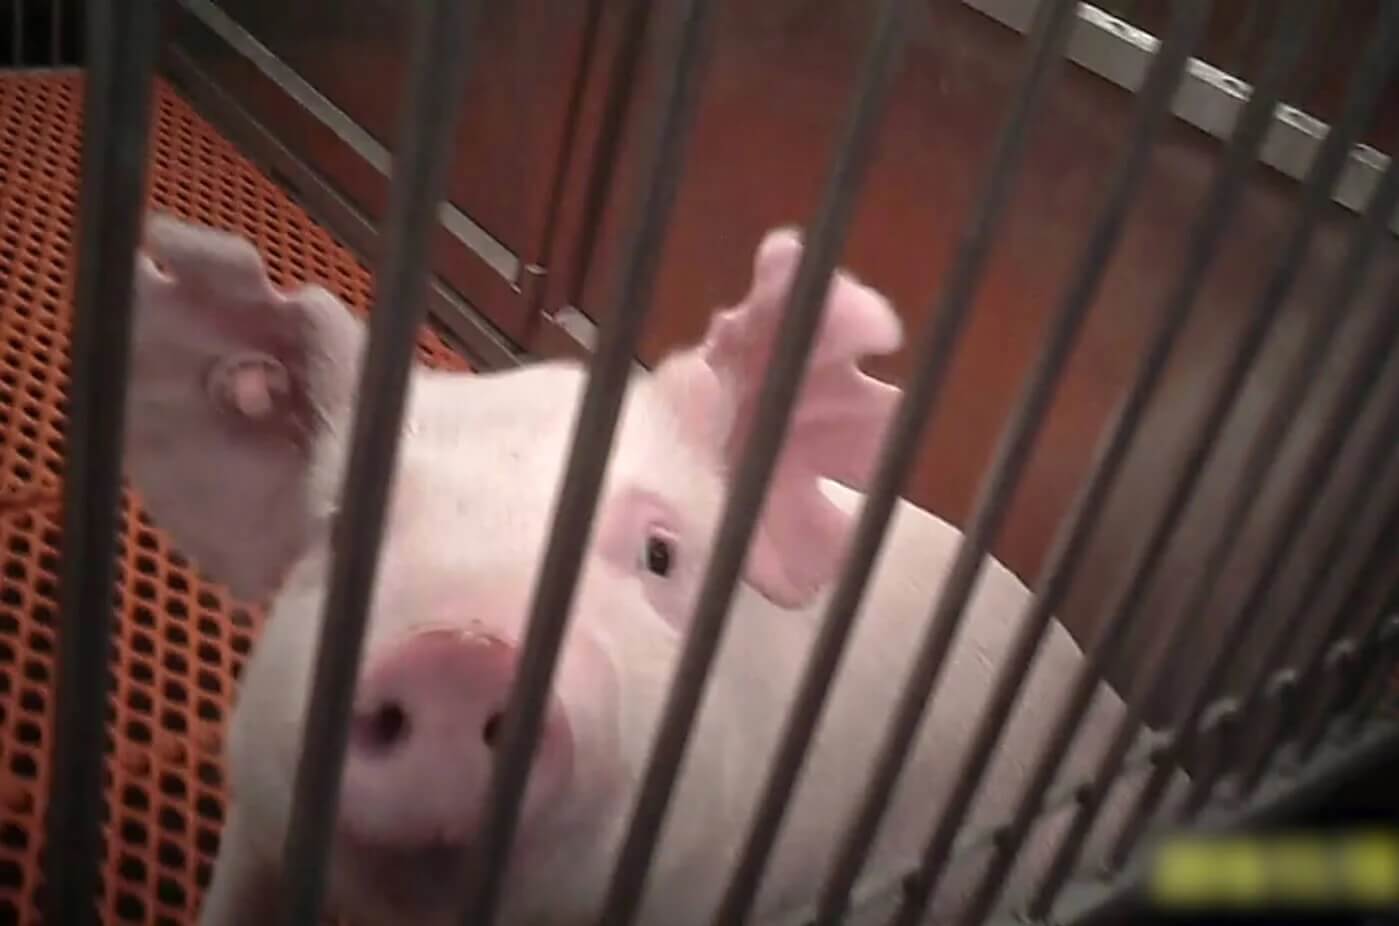 pigs another Cleveland Clinic animal laboratory victim Tell OHSU to Stop Using Live Pigs for OB/GYN Surgery Practice